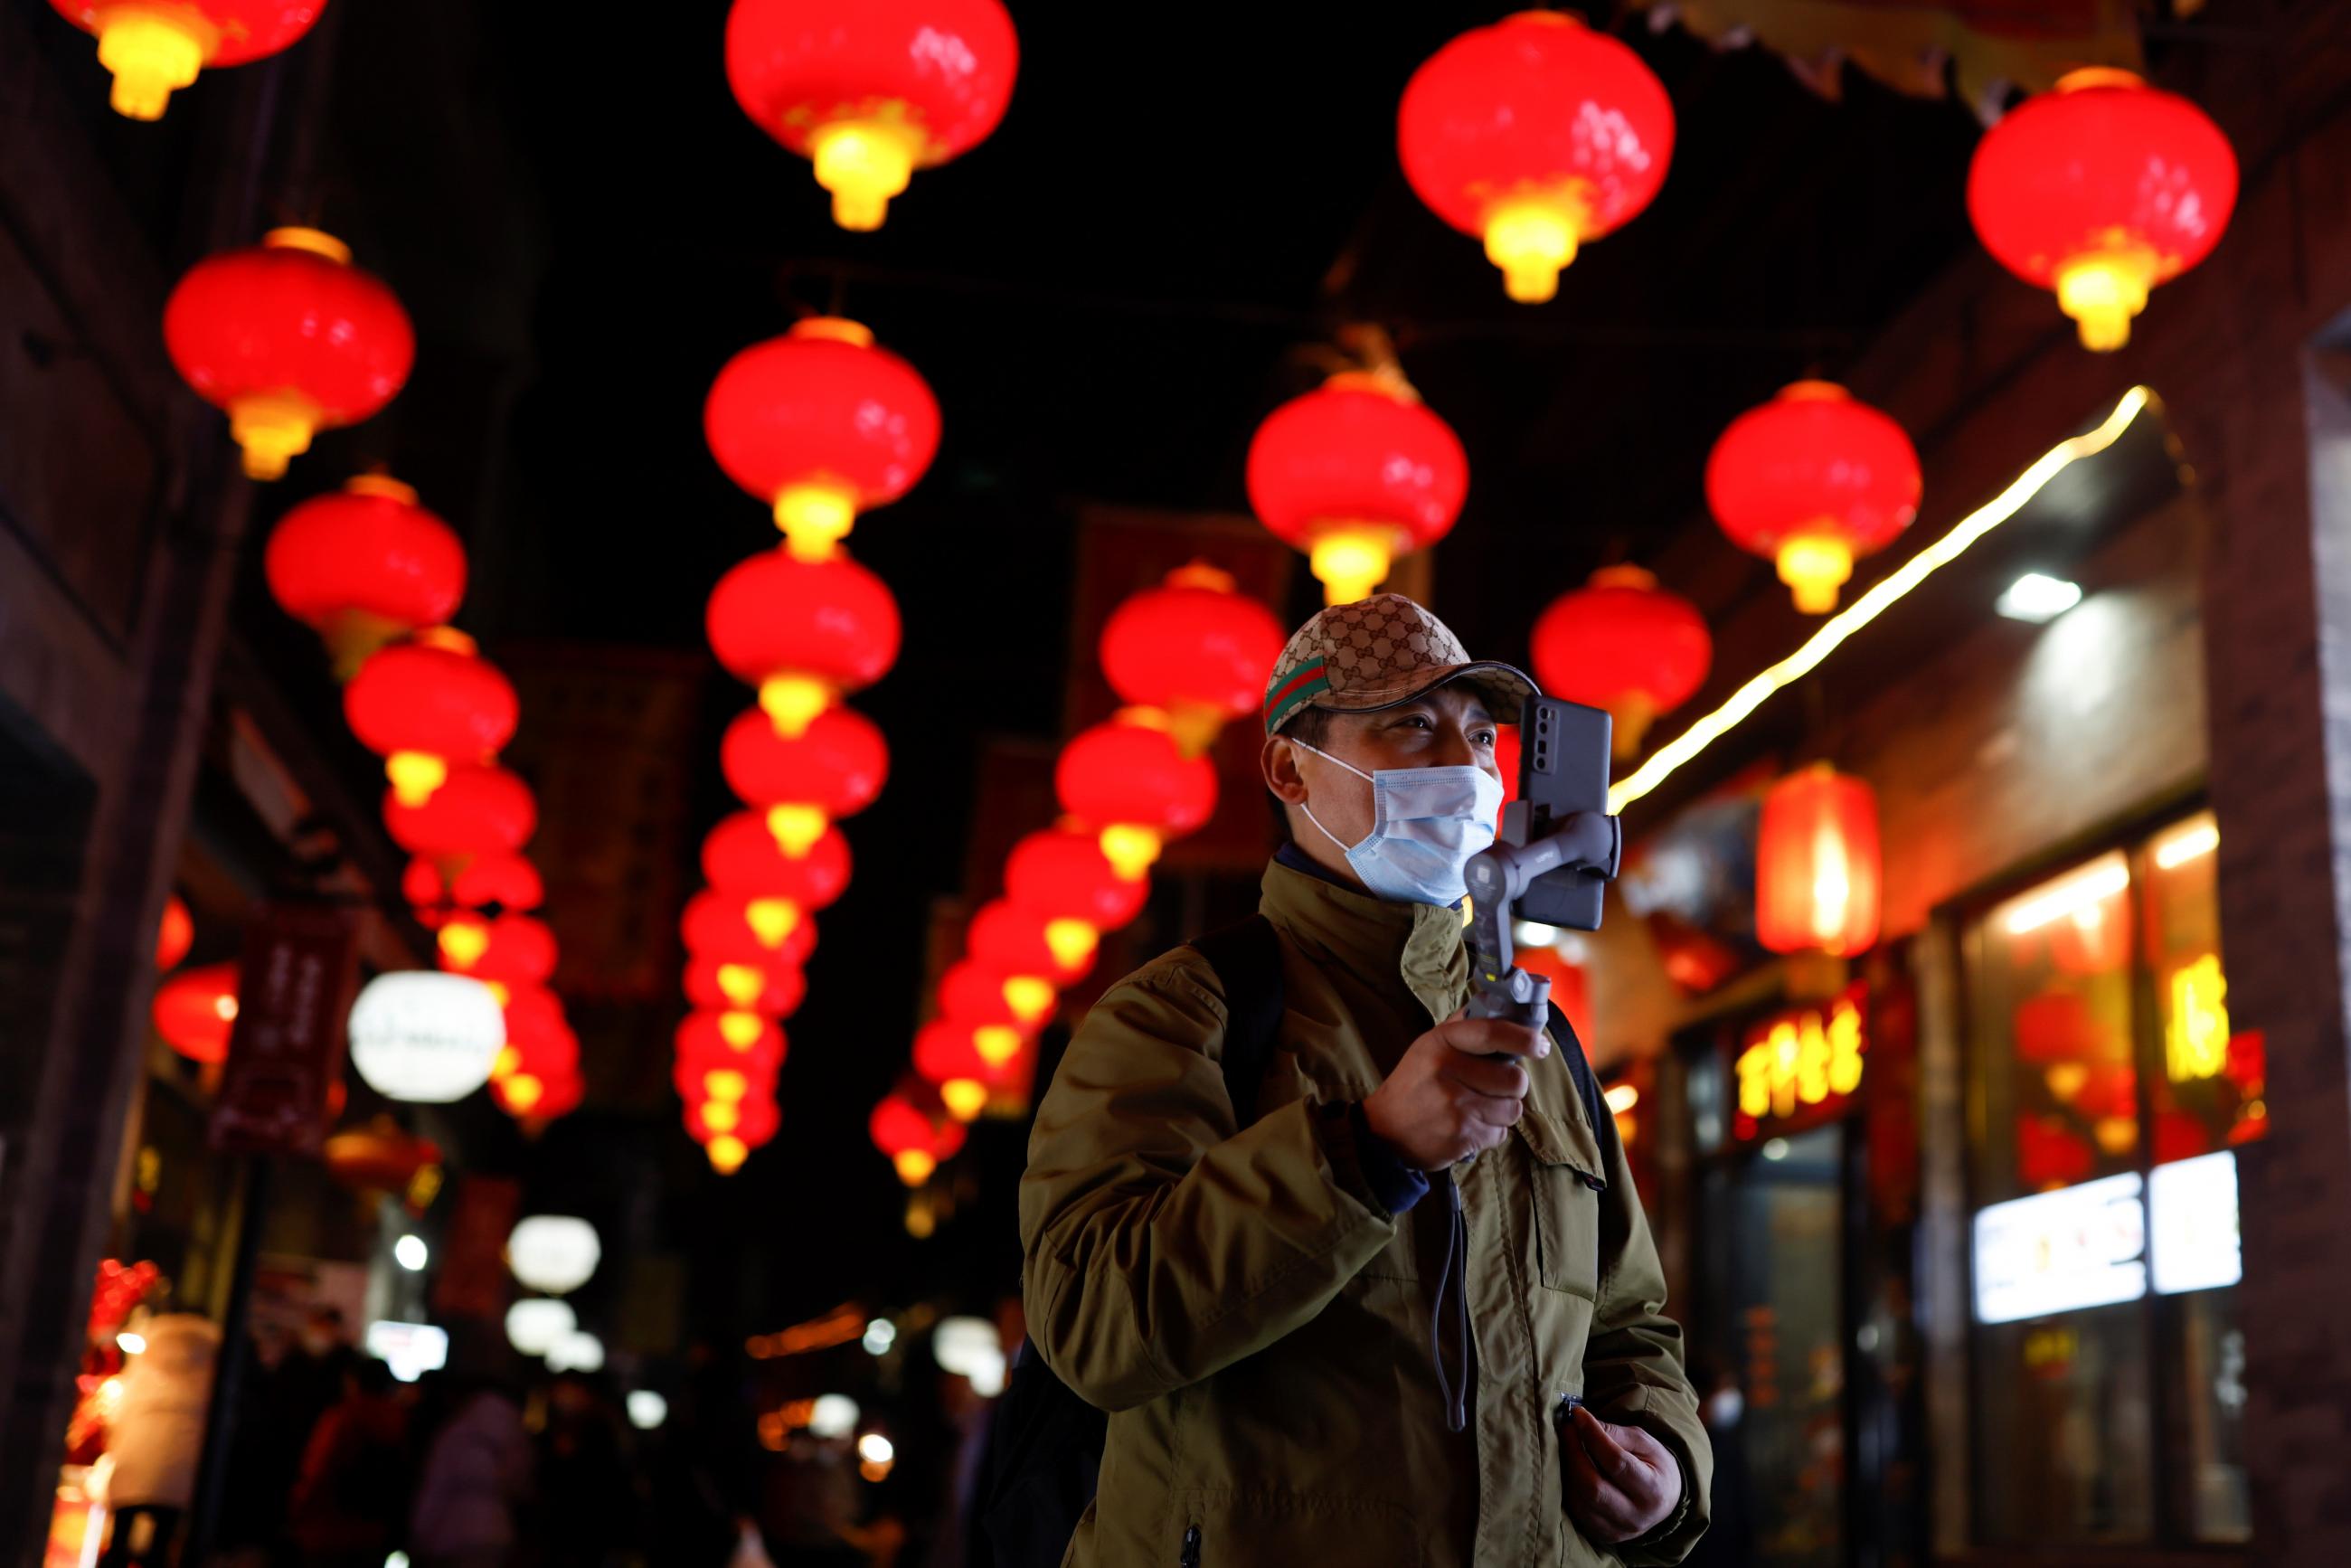 A man wearing a face mask following a COVID outbreak uses his phone while walking near lantern-lined Qianmen Street ahead of Lunar New Year celebrations, in Beijing, China on February 10, 2021.